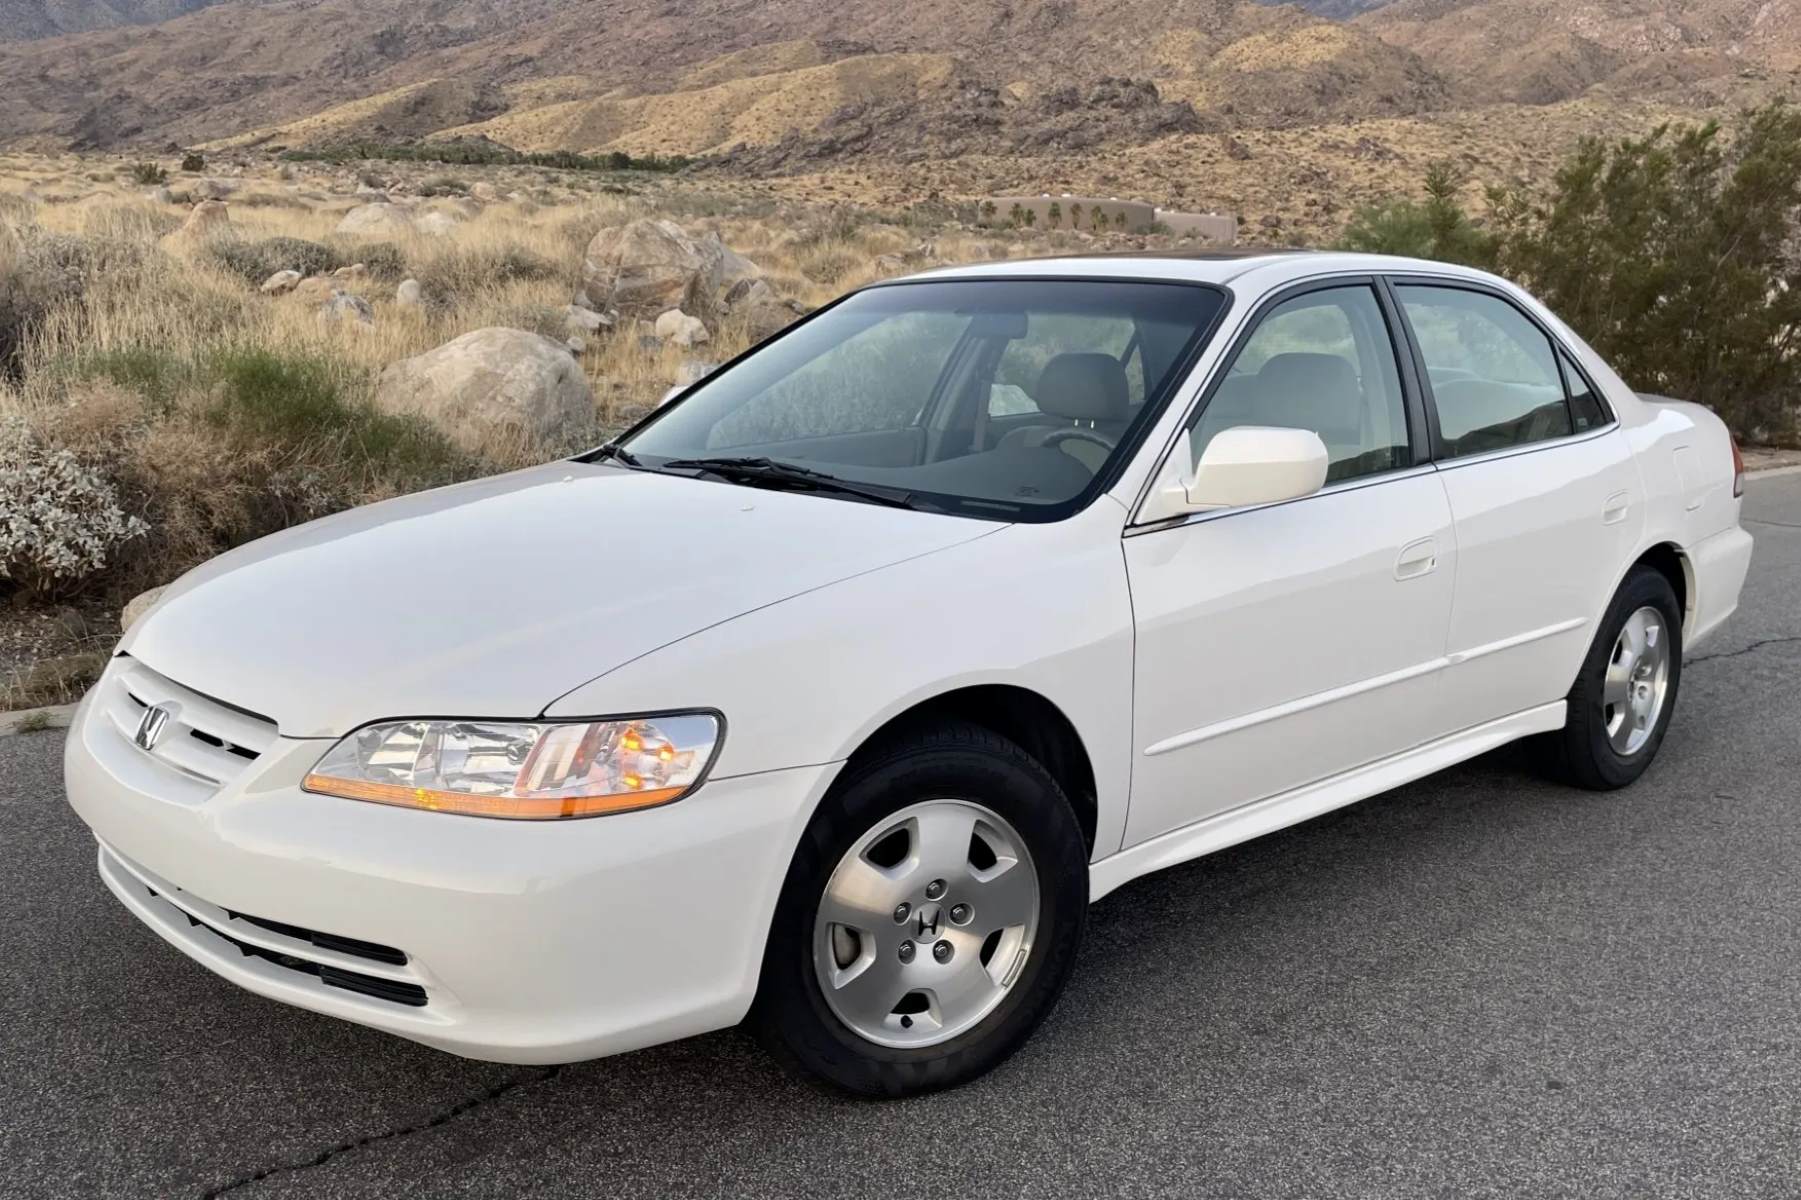 You Won't Believe How Amazing The Honda Accord 2001 Model Is!